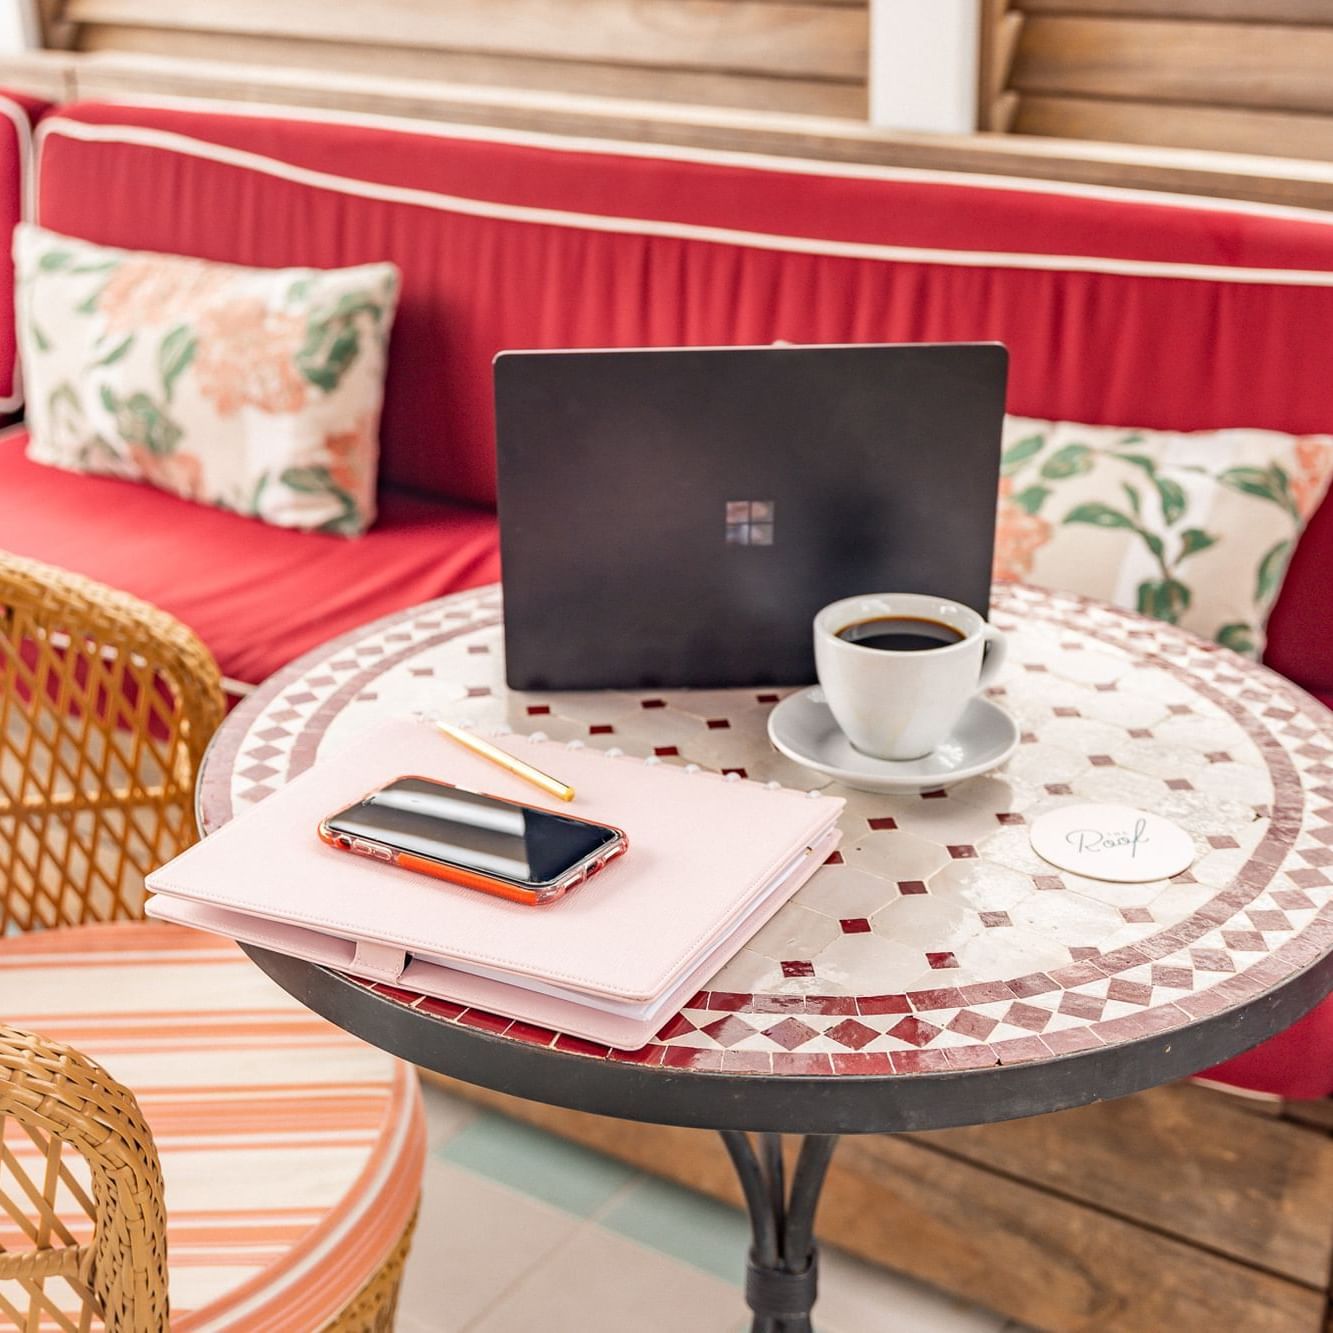 Laptop & coffee on a table in the lounge at Esme Miami Beach